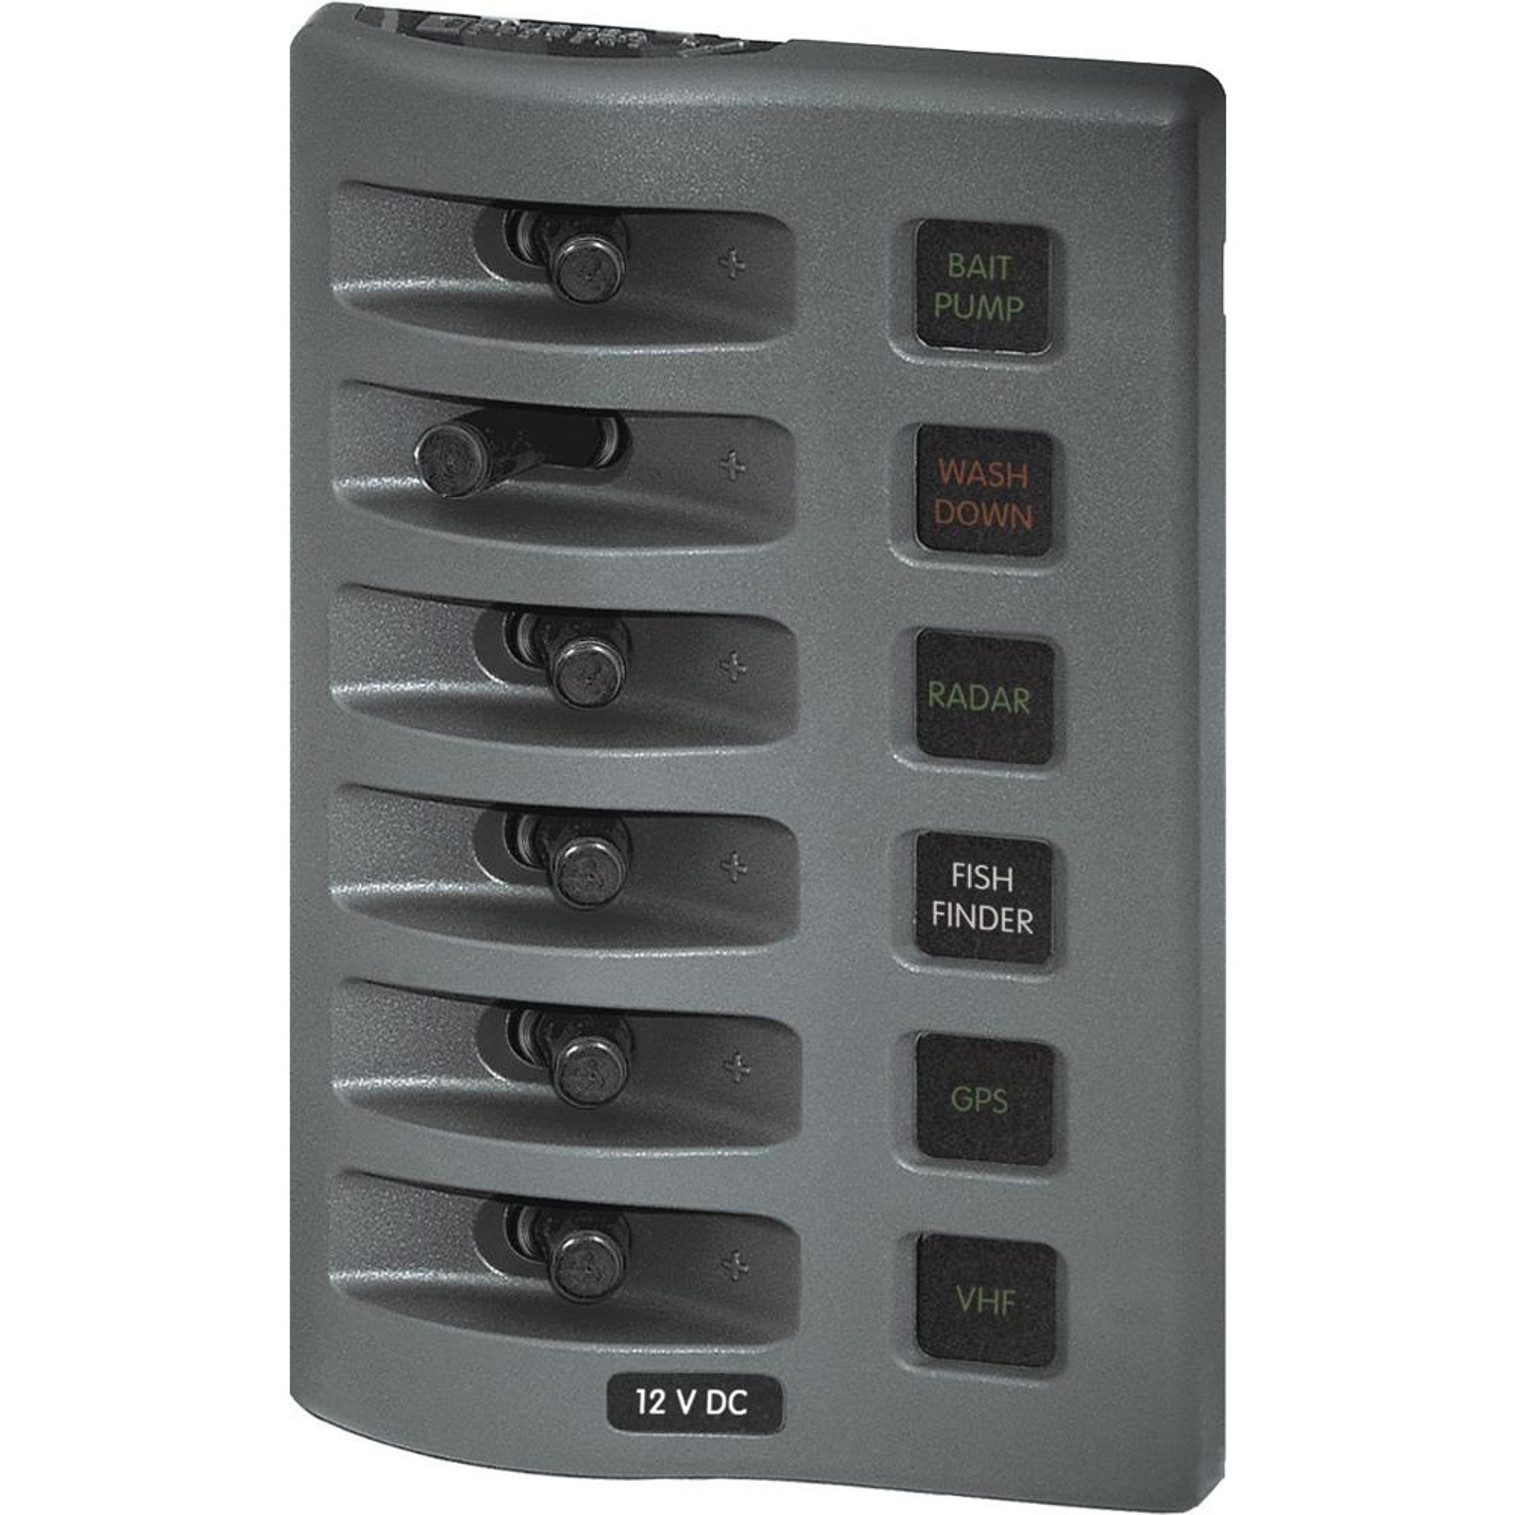 Blue Sea 4306 WeatherDeck Water Resistant Fuse Panel - 6 Position - Grey